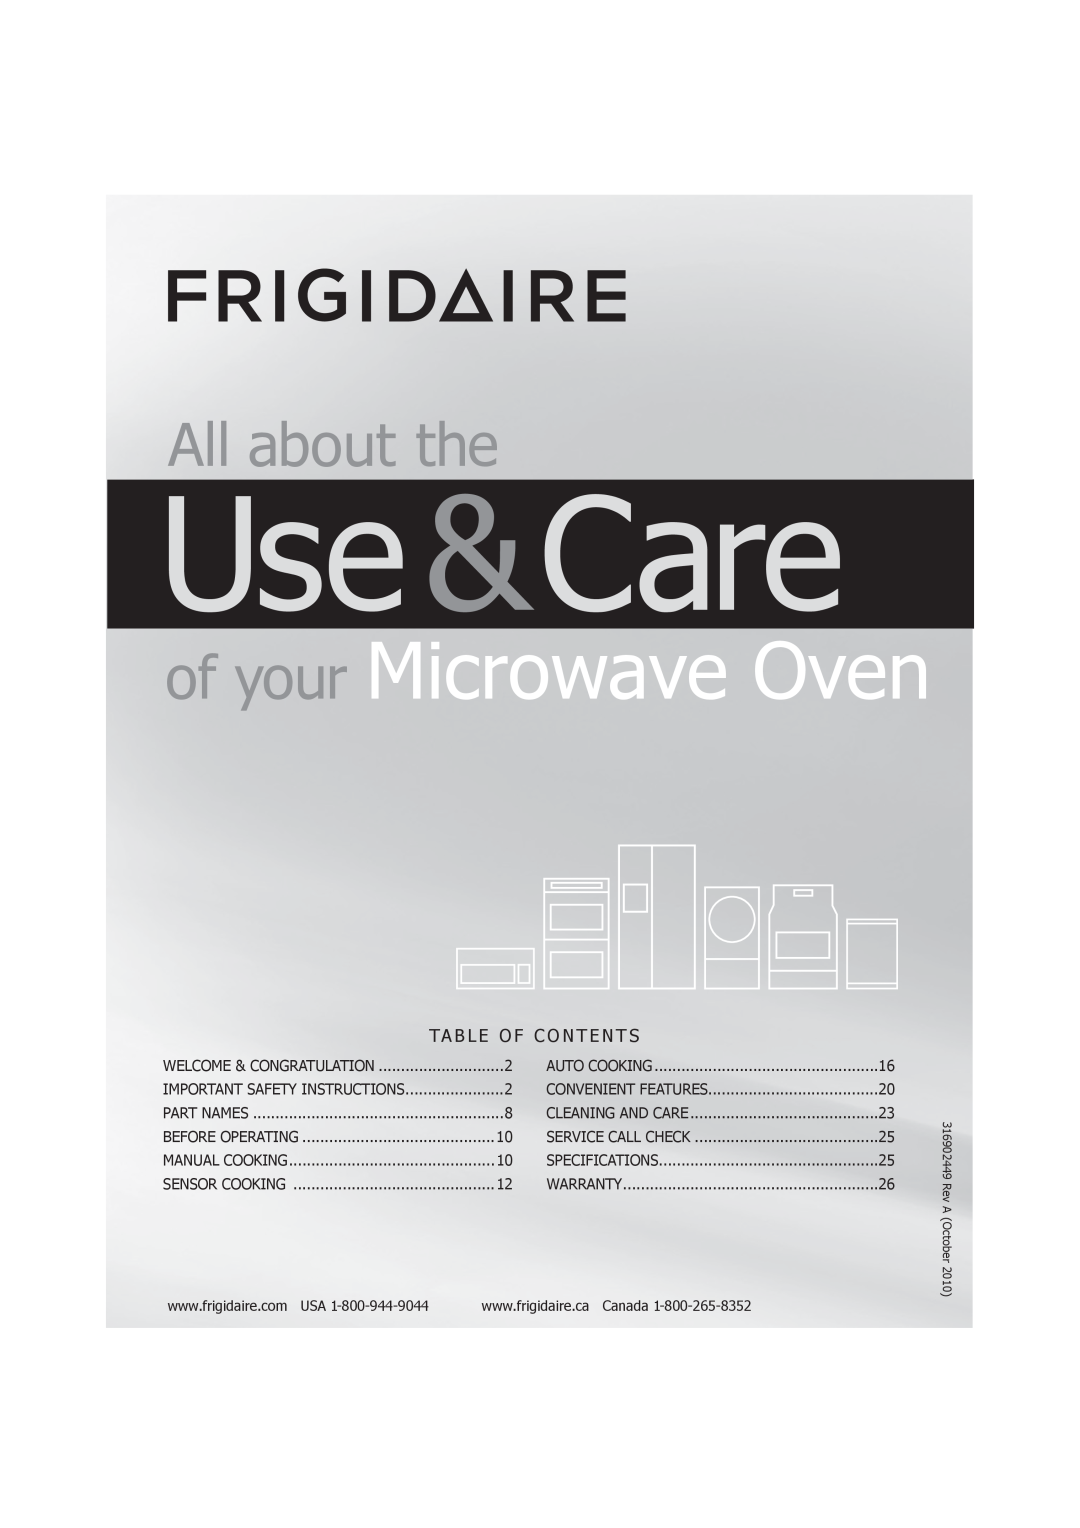 Frigidaire FGMV174KF, TINSEB299WRRZ-EL01 important safety instructions Use &Care, of your Microwave Oven, All about the 